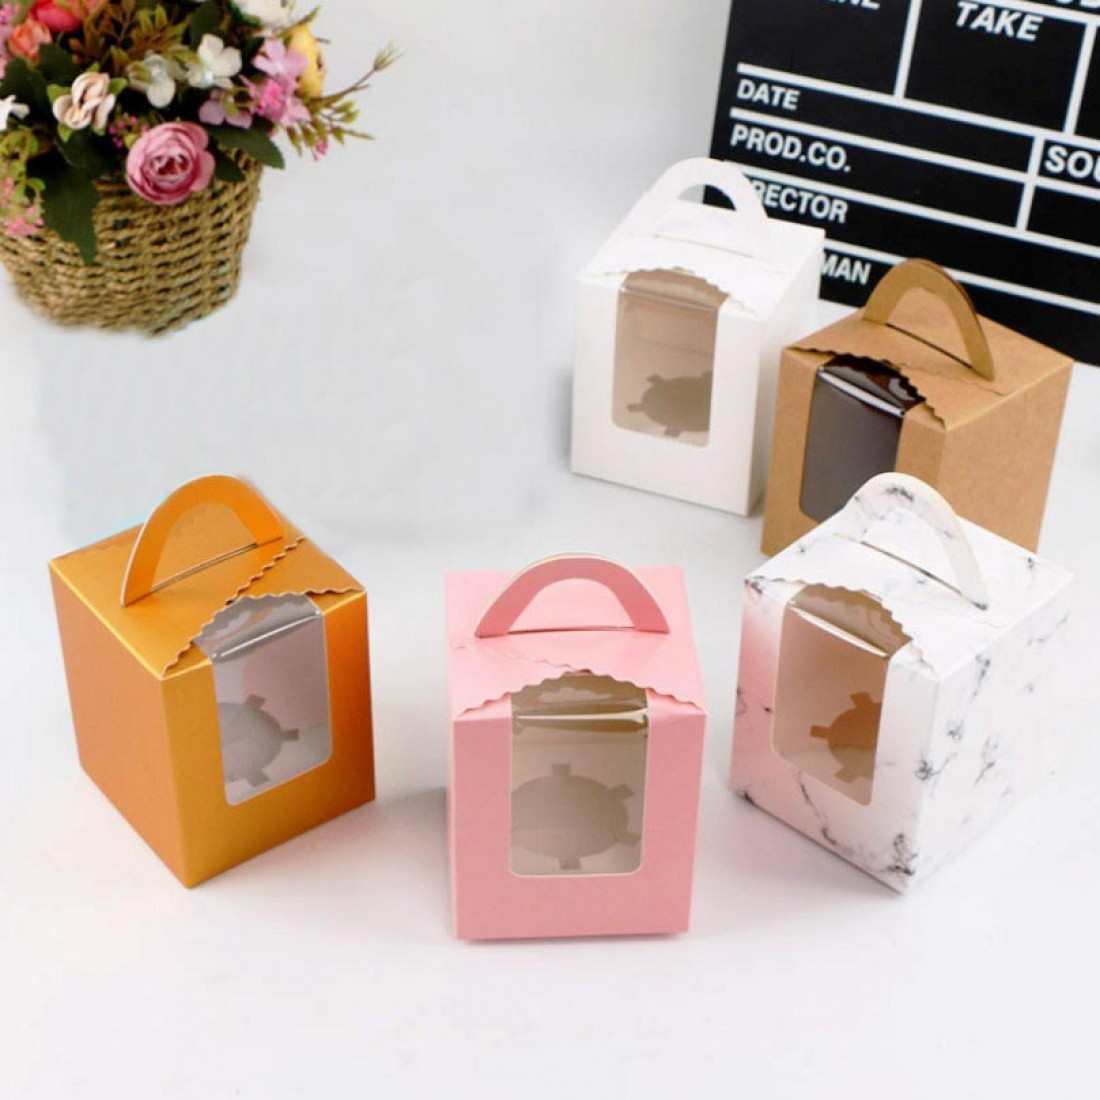 PAPER MUFFIN CAKE BOX WITH WINDOW AND HANDLE 1 CAVITY (9.2(W)*9.2(L)*11(H) CM